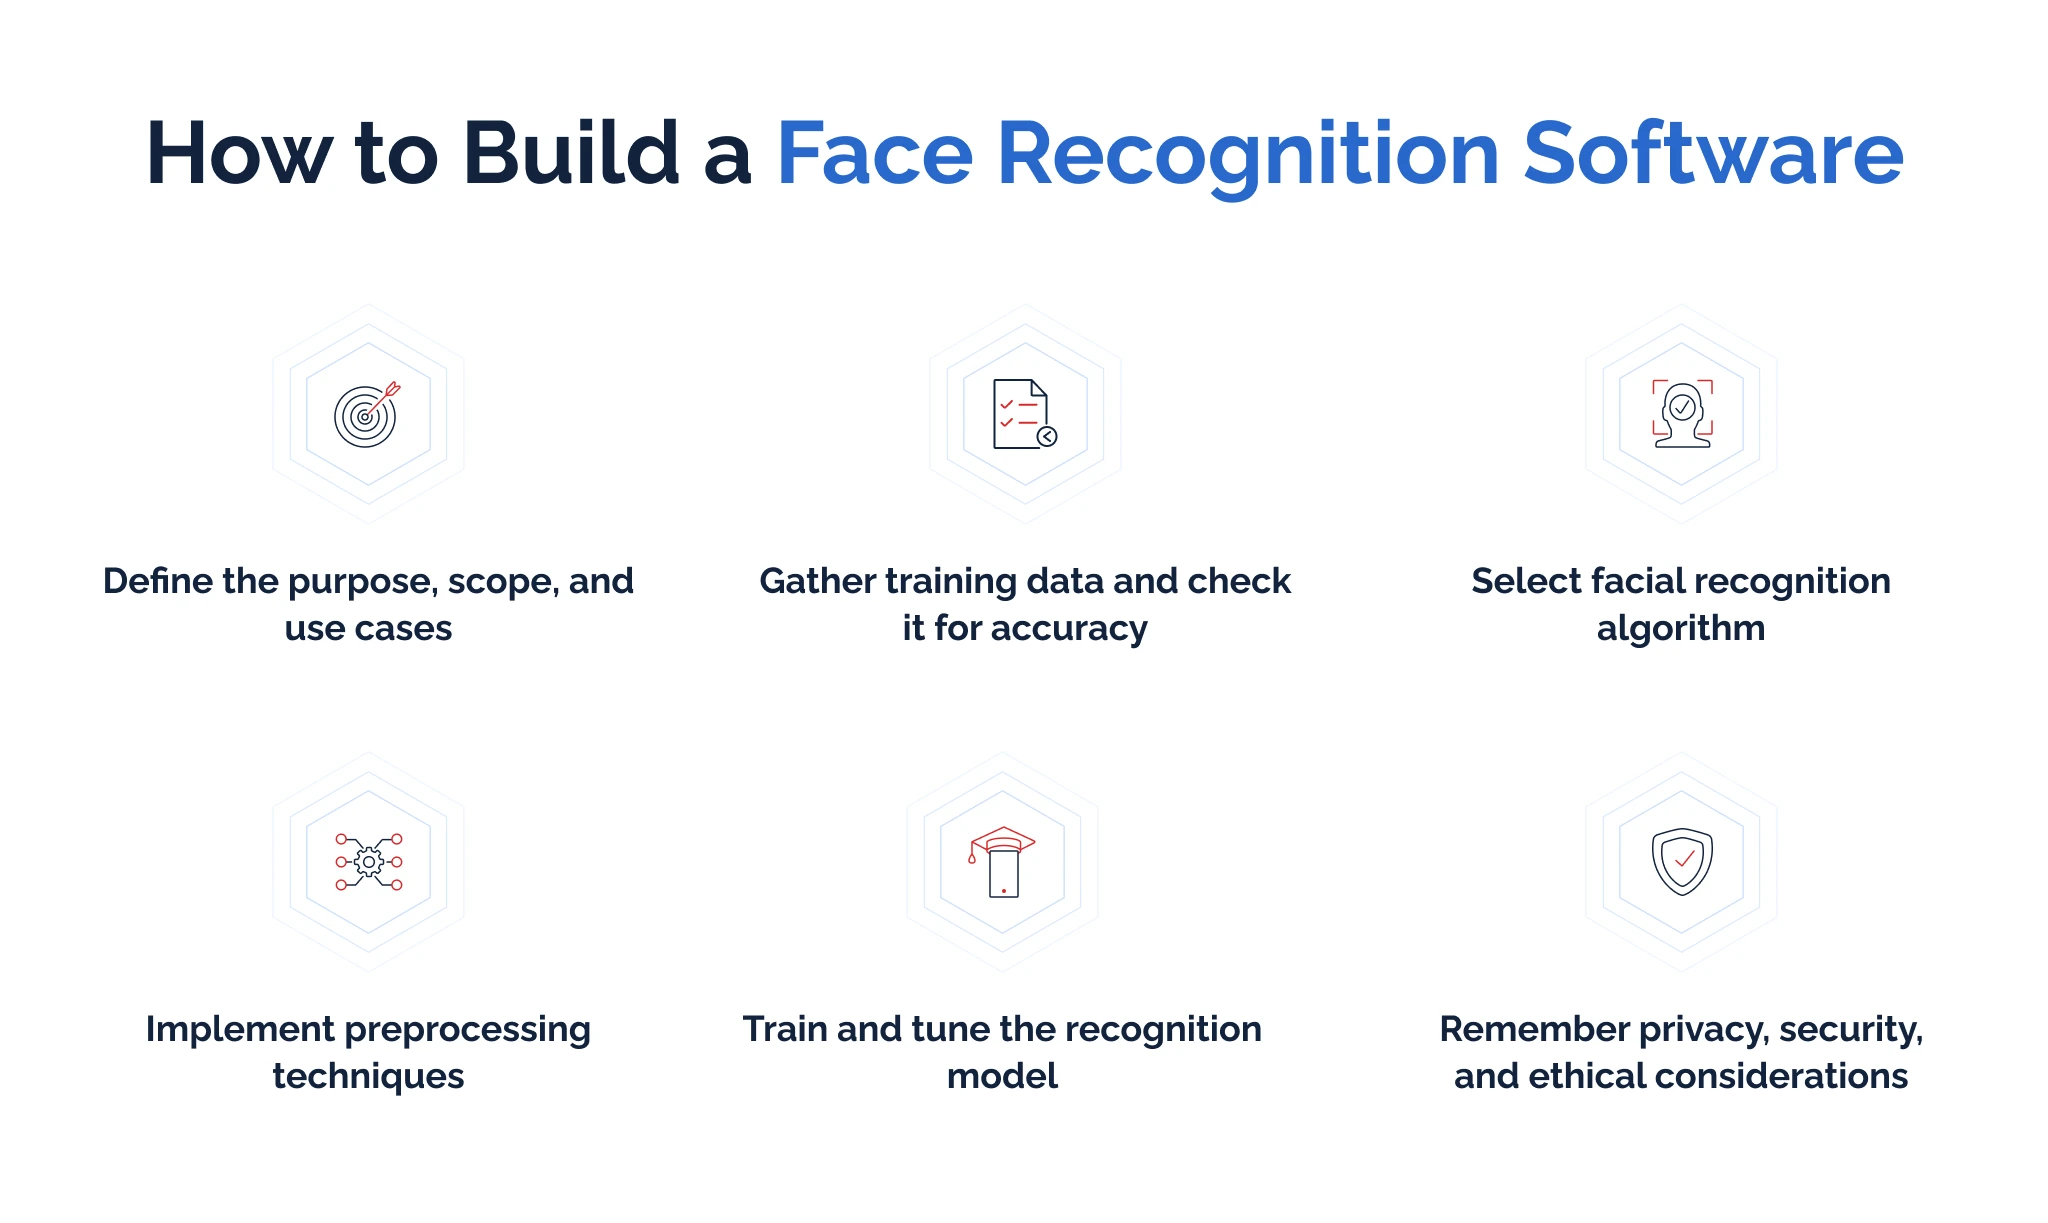 How to build a face recognition software